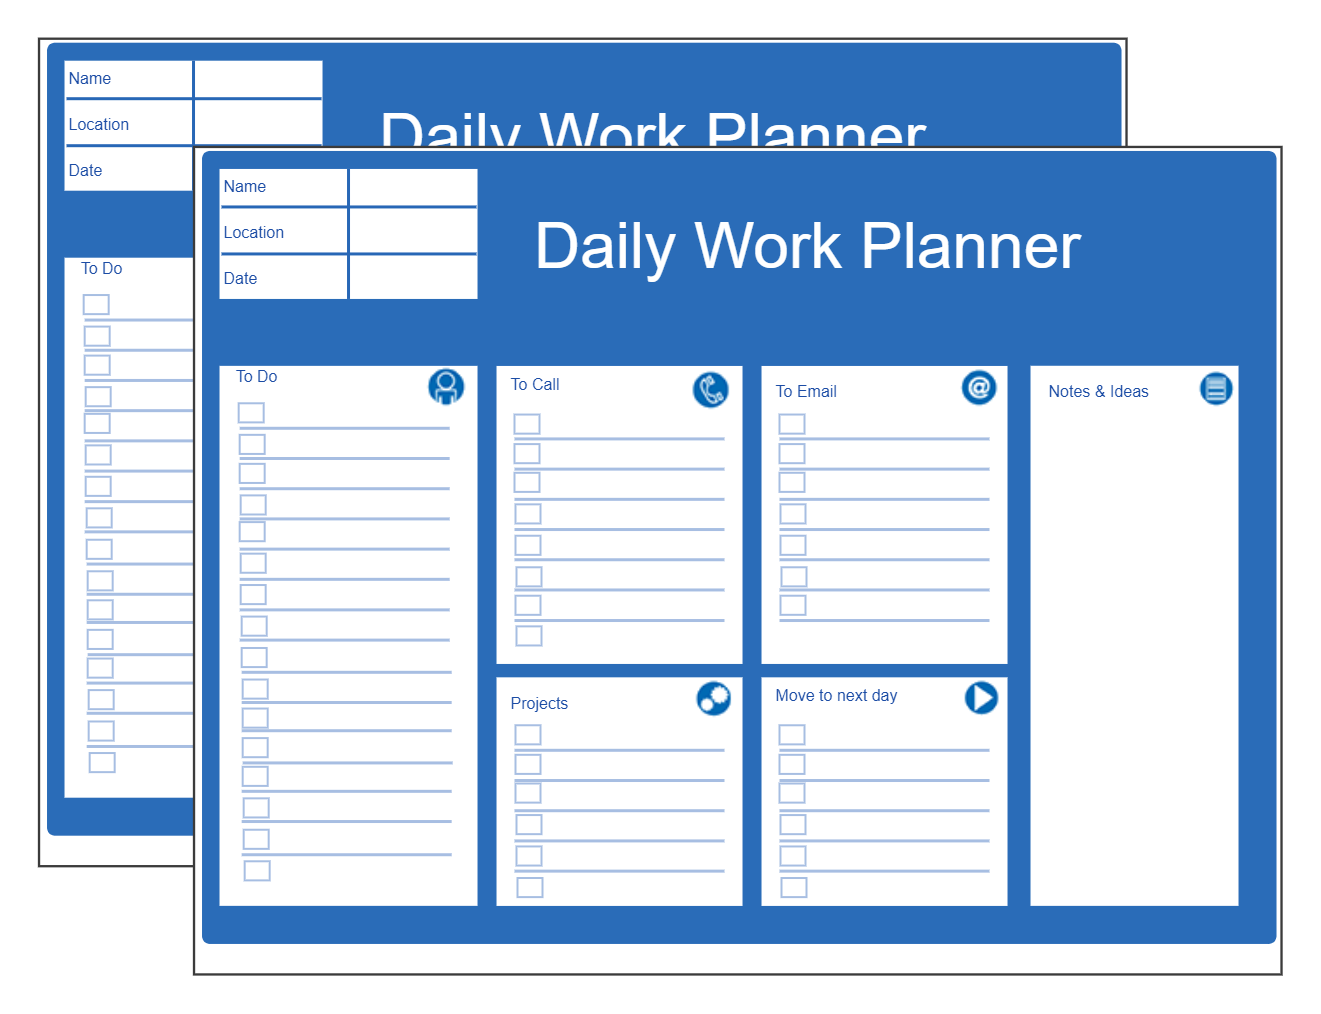 Daily Work Planner Resources